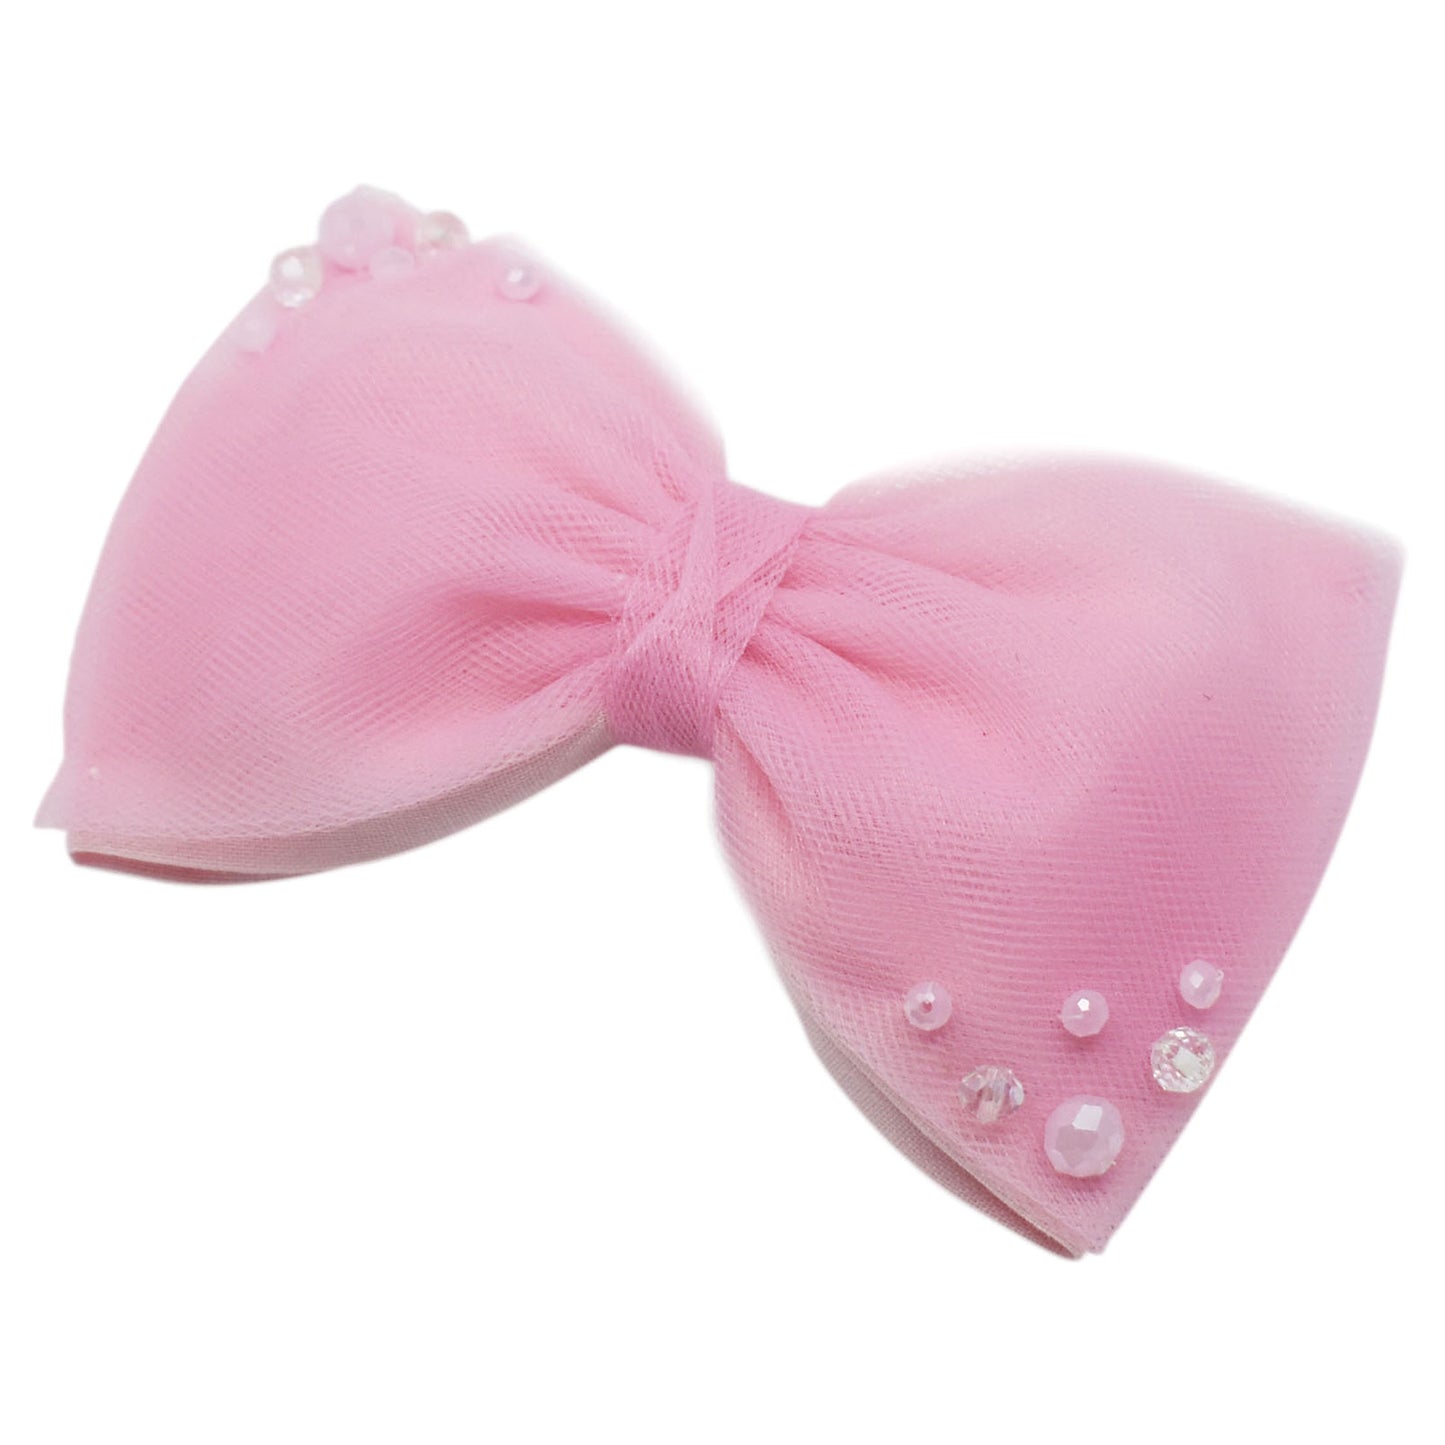 The Marilyn Gentle Pink Bow